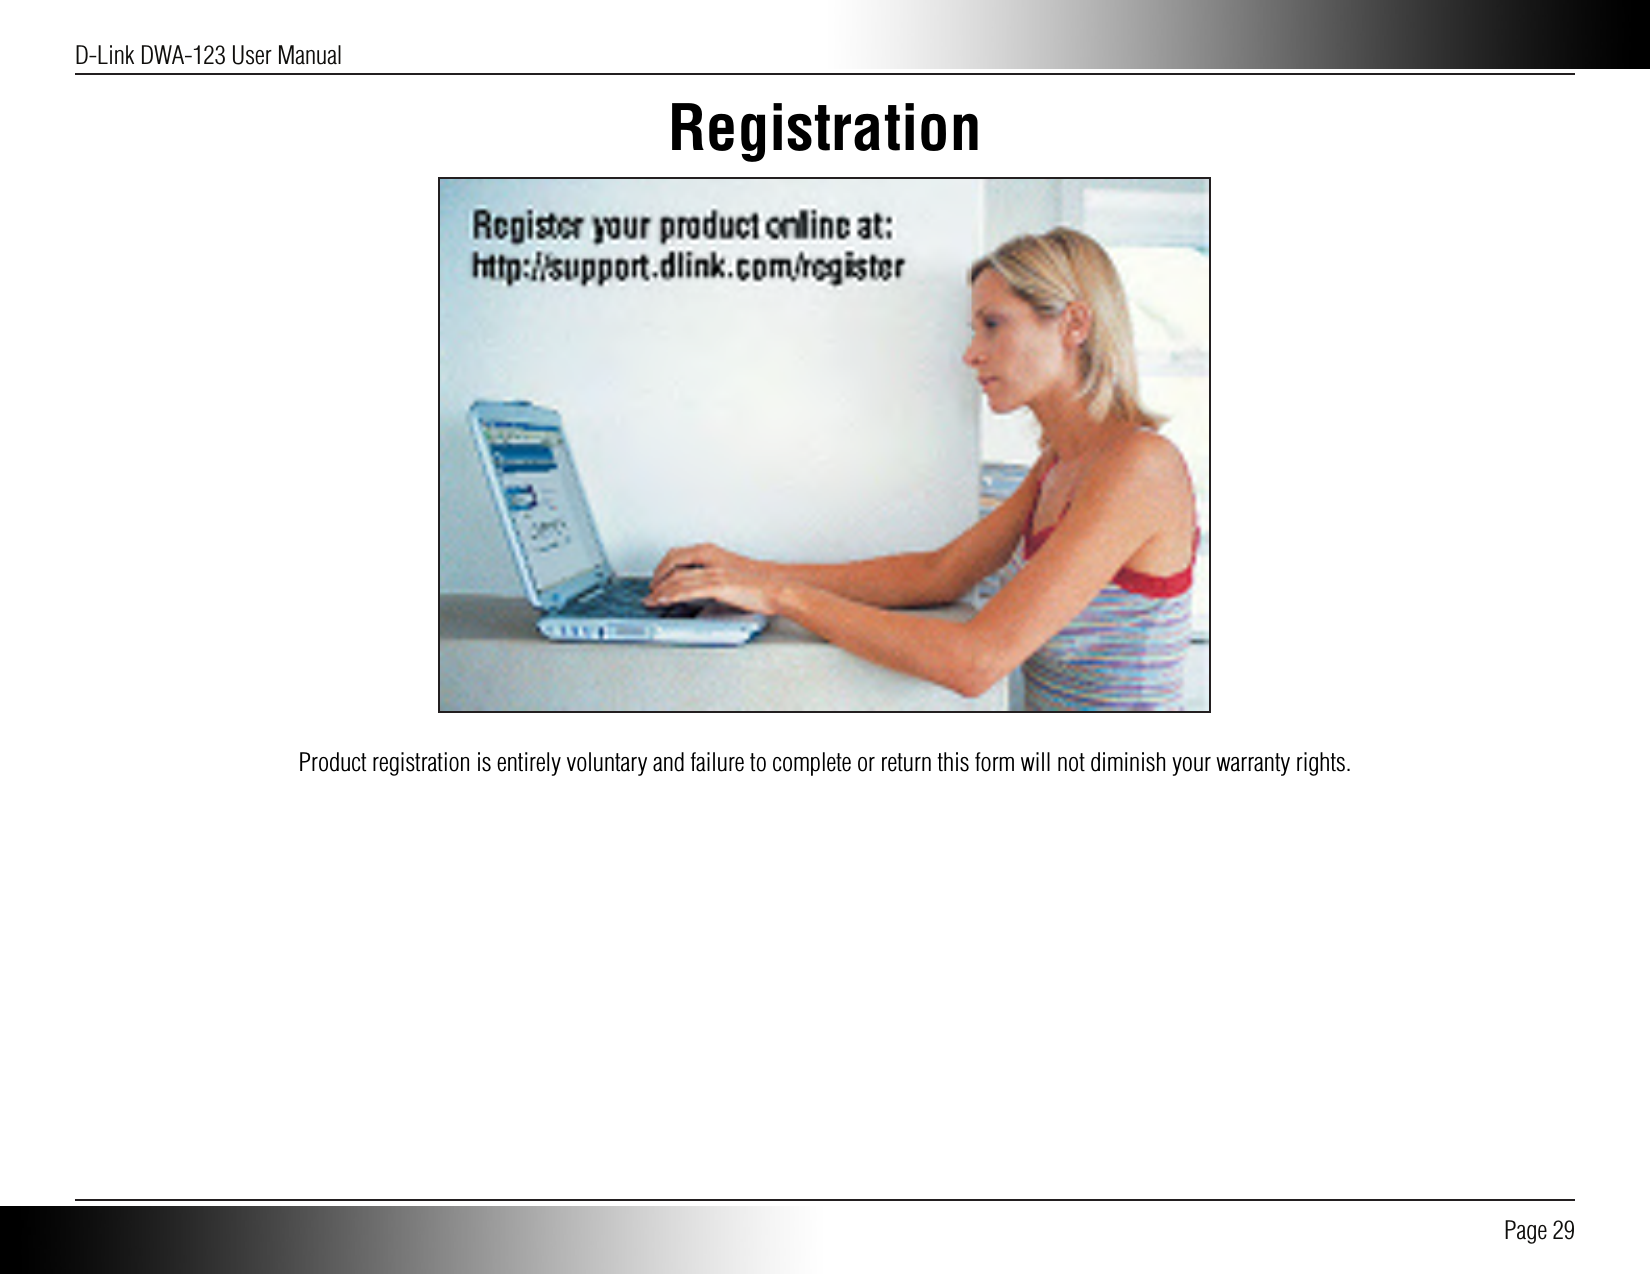 D-Link DWA-123 User Manual Page 29RegistrationProduct registration is entirely voluntary and failure to complete or return this form will not diminish your warranty rights.